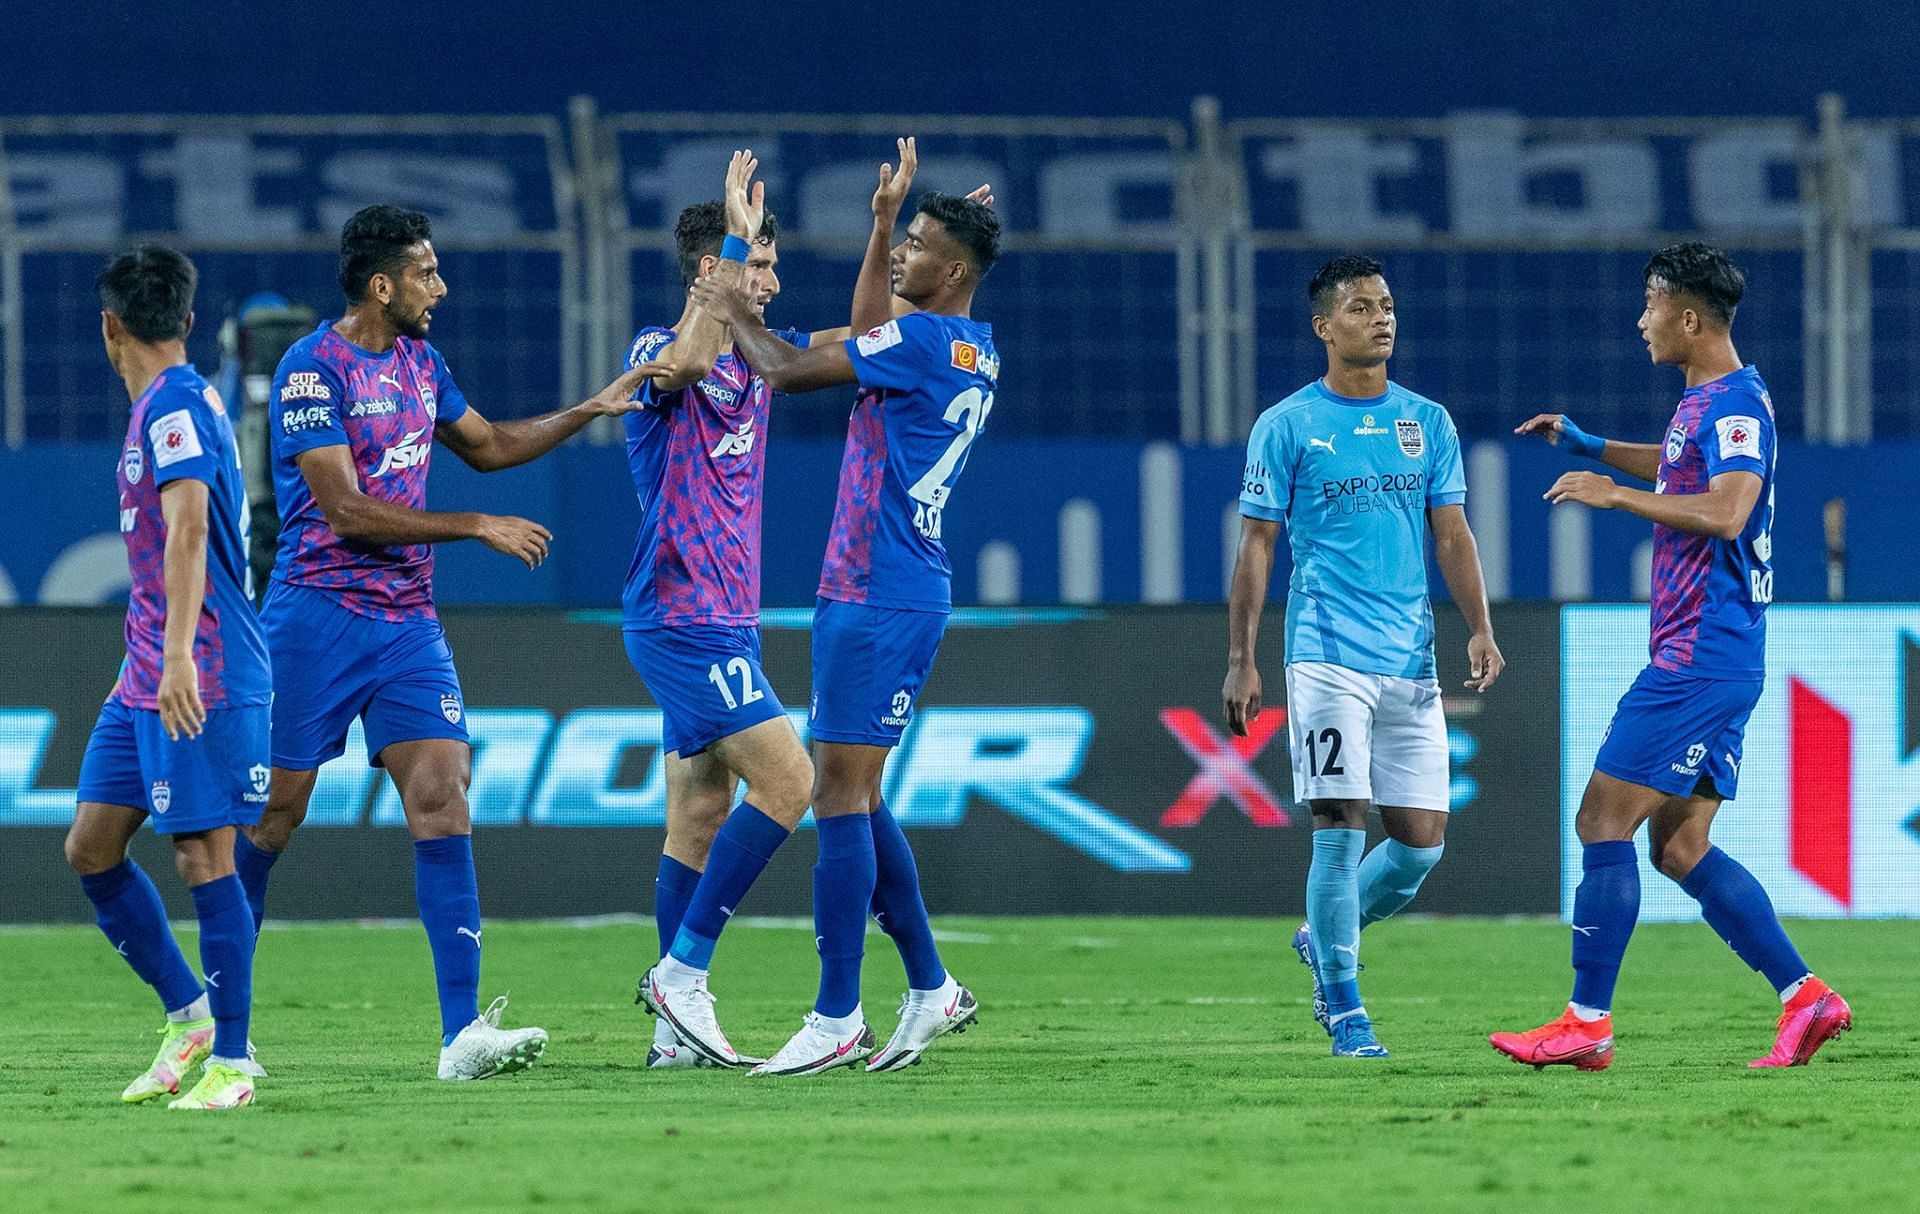 Bengaluru FC played their best game of the season today (Image courtesy: ISL social media)